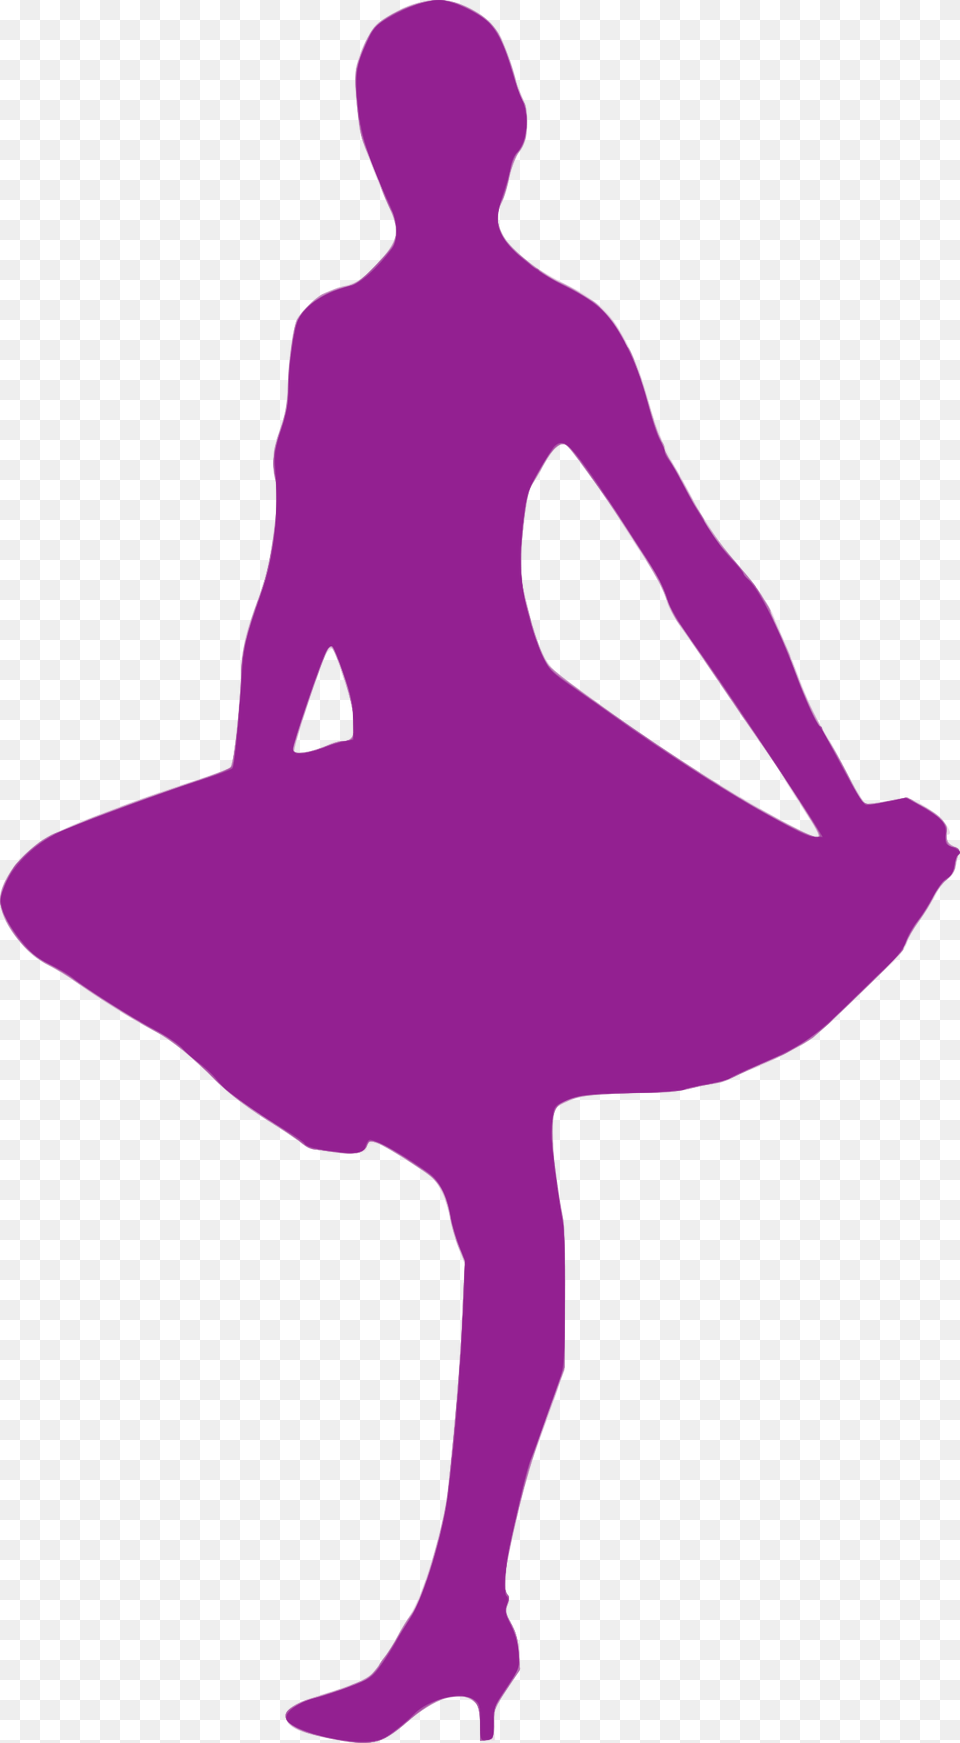 Computer Icons Ballet Dancer Silhouette Borboleta Icon, Dancing, Leisure Activities, Person, Adult Png